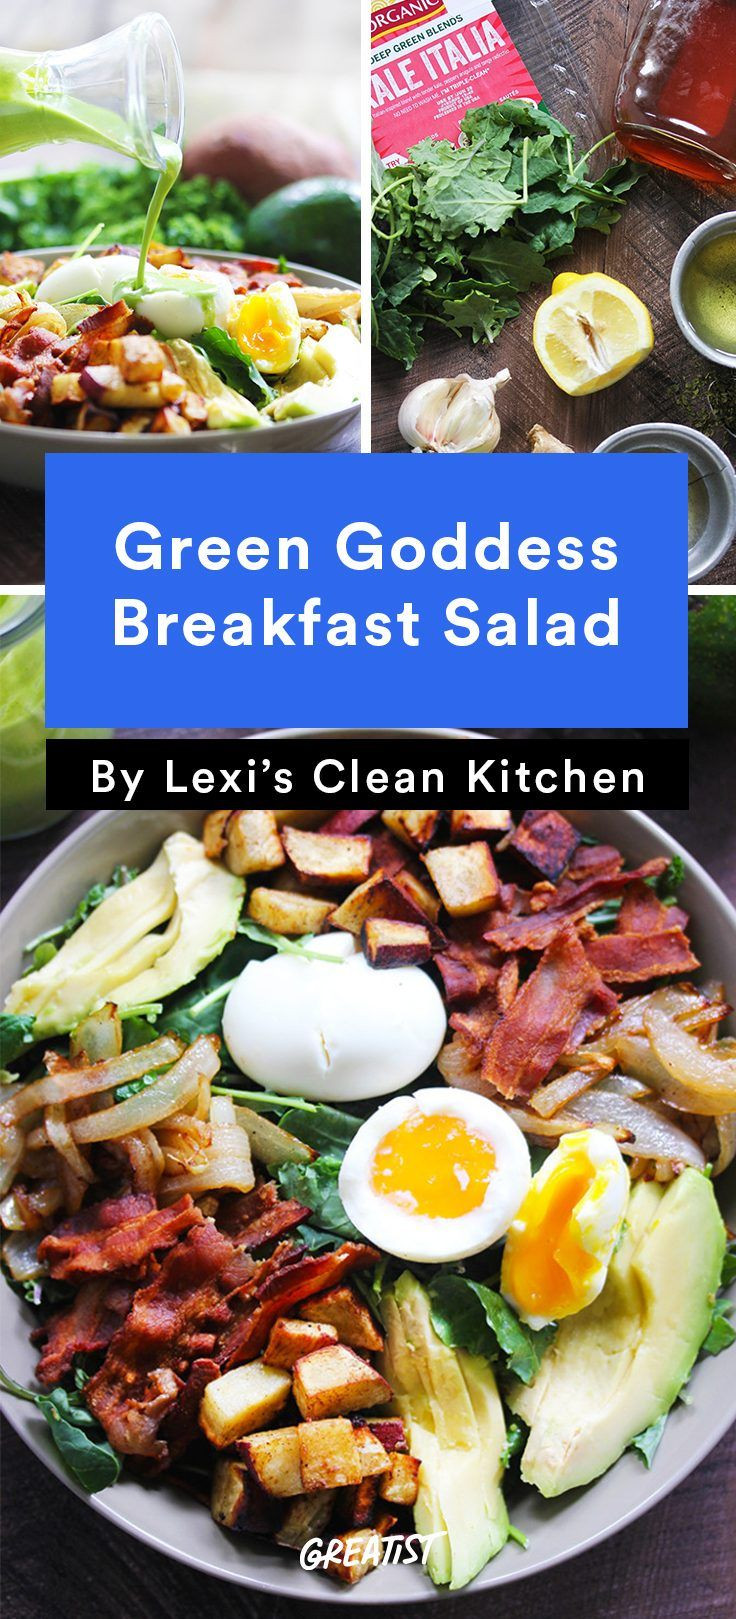 Paleo Diet Food List Breakfast
 7 Clean Breakfasts to Brighten Your Morning With images